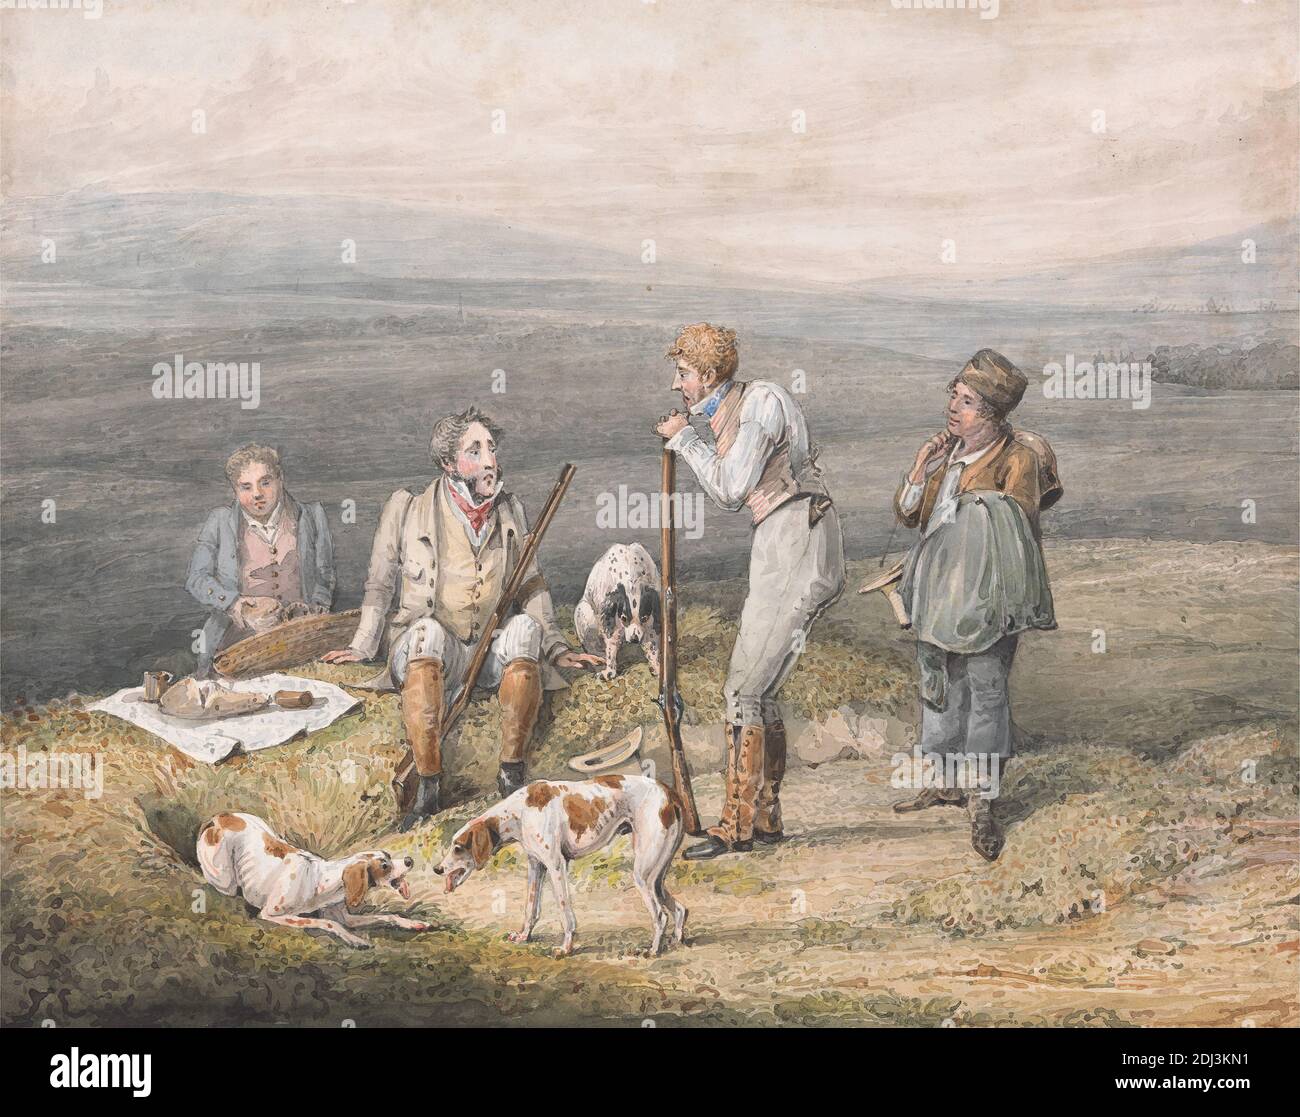 Grouse Shooting: The Wrong Sort, Henry Thomas Alken, 1785–1851, British, undated, Watercolor, pen and black ink, brown ink, and graphite on medium, slightly textured, cream, wove paper, mounted on thick, moderately textured, brown, wove paper, Sheet: 8 1/2 × 10 3/4 inches (21.6 × 27.3 cm), Contemporary drawn border: 9 × 11 1/4 inches (22.9 × 28.6 cm), and Mount: 11 × 13 3/16 inches (27.9 × 33.5 cm), basket, blanket, dogs (animals), grass, grouse, hill, hounds (dogs), hunt, hunters, hunting, landscape, men, rocks (landforms), shotguns, sporting art Stock Photo